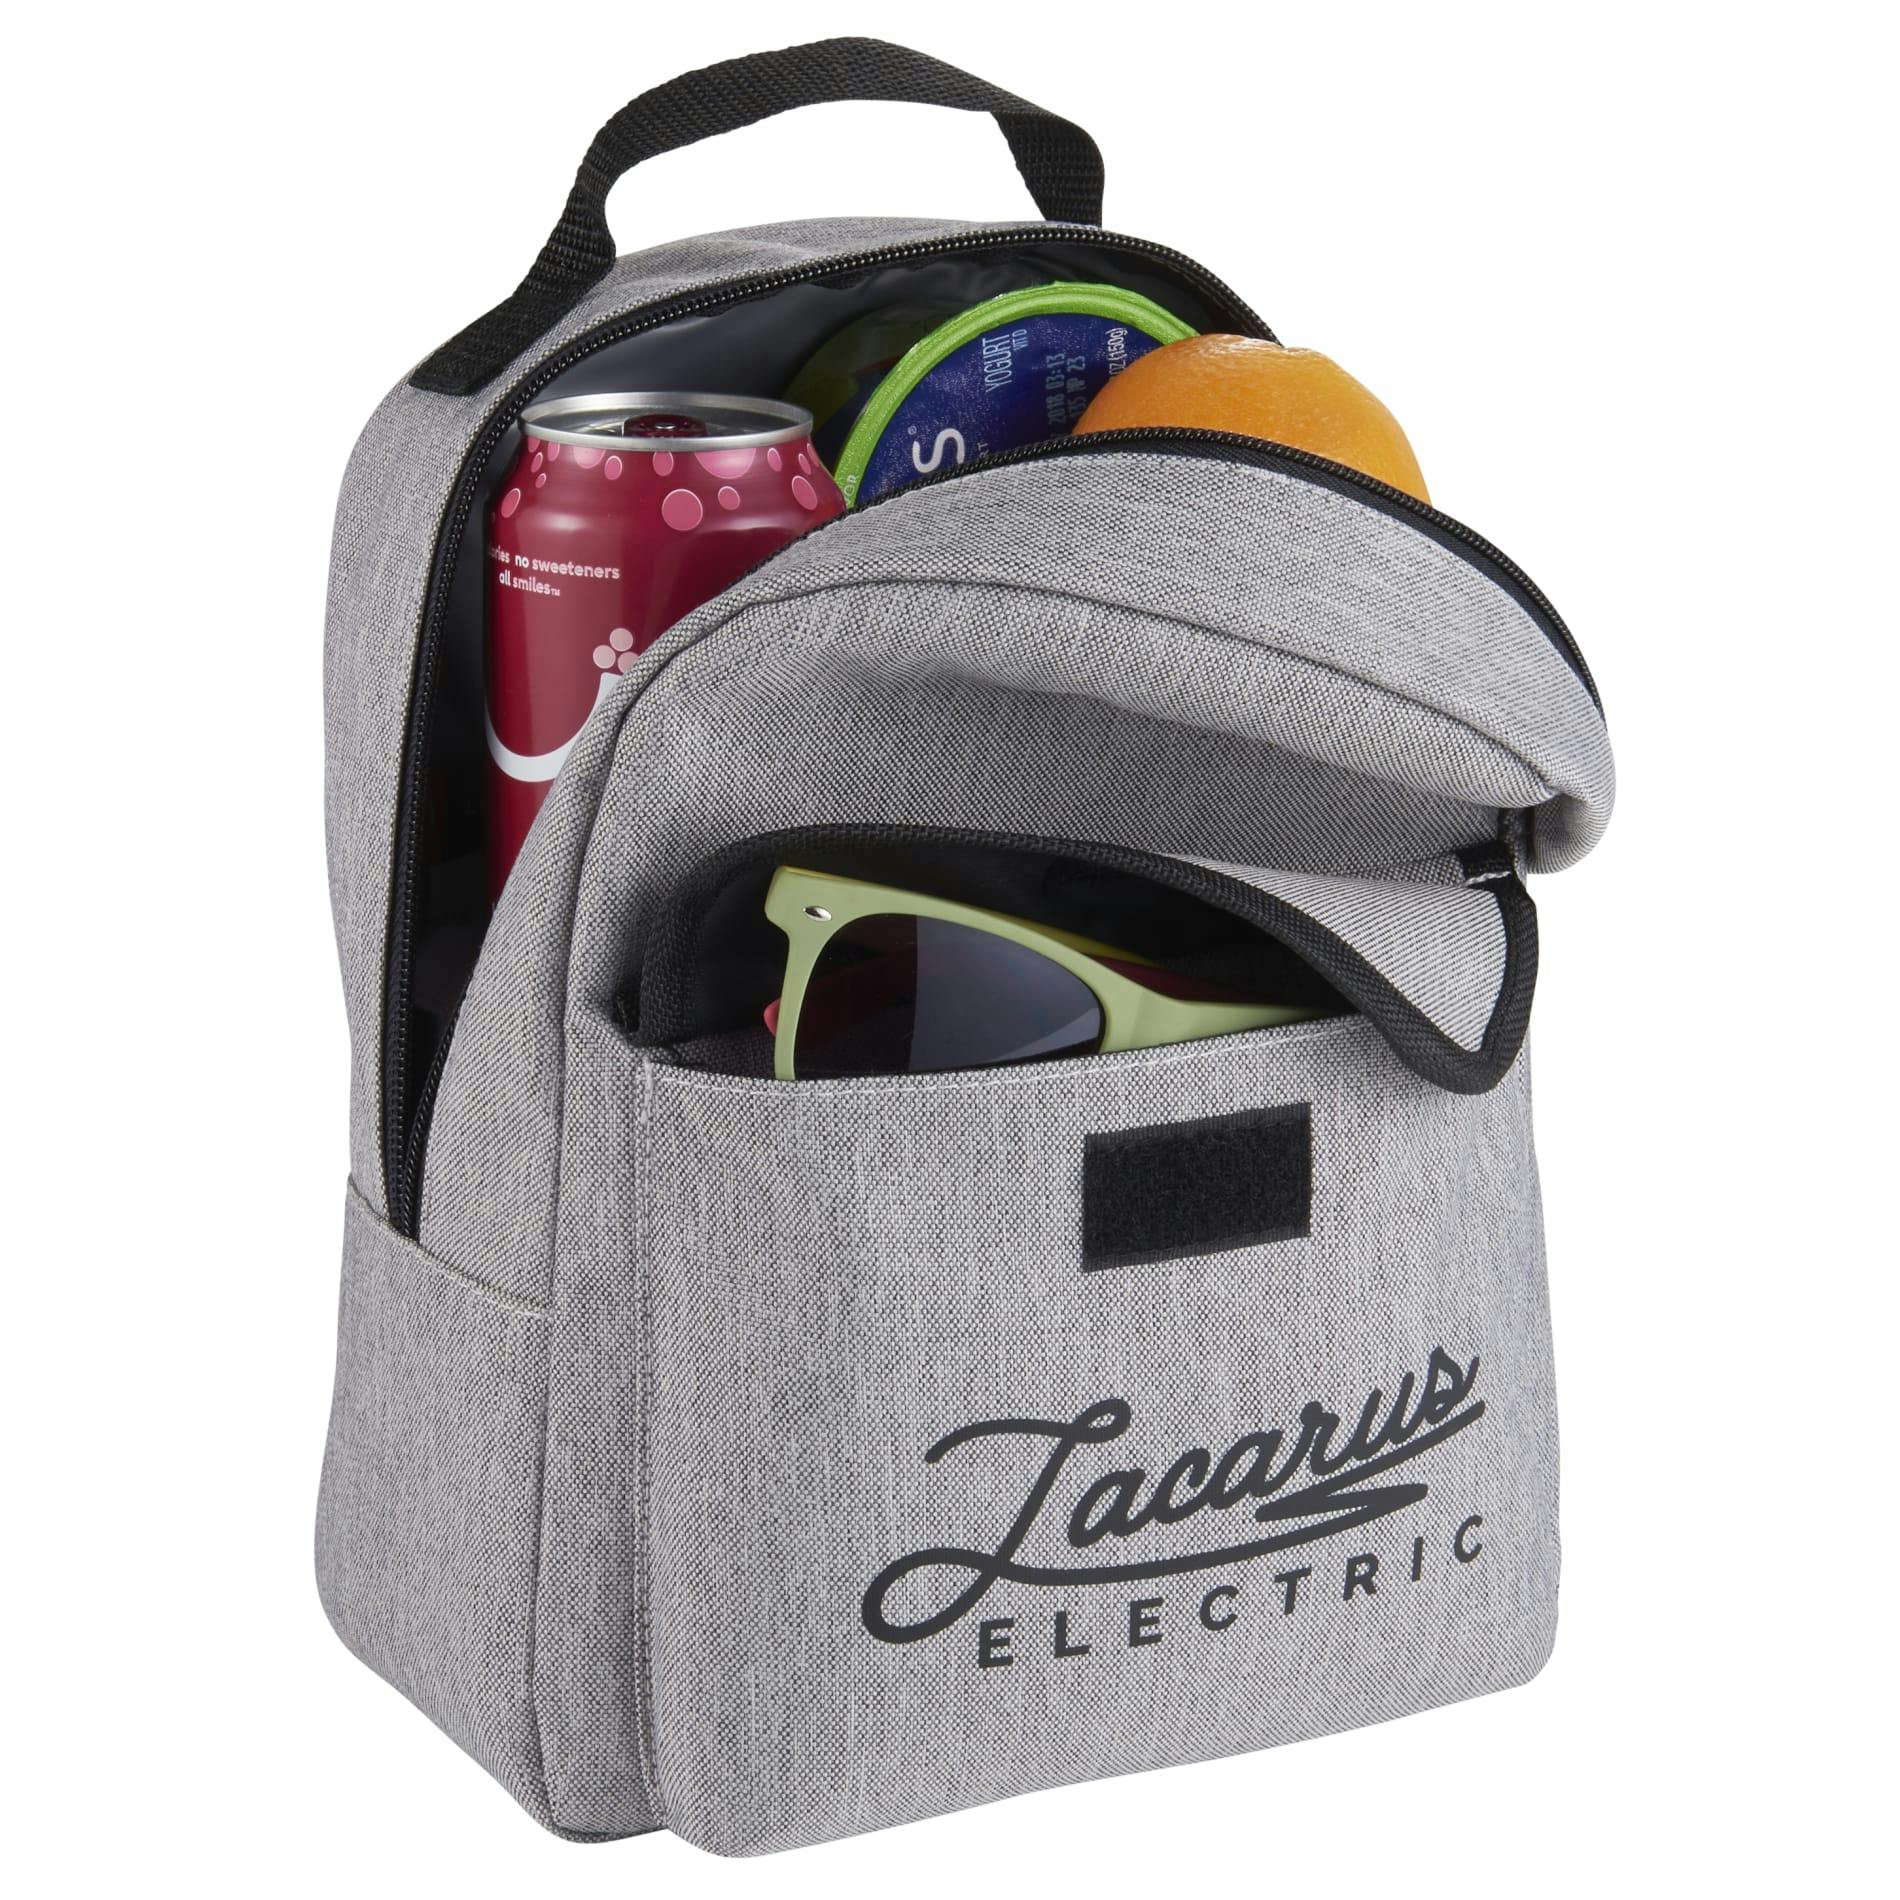 Merchant & Craft Revive rPET Lunch Cooler - additional Image 1